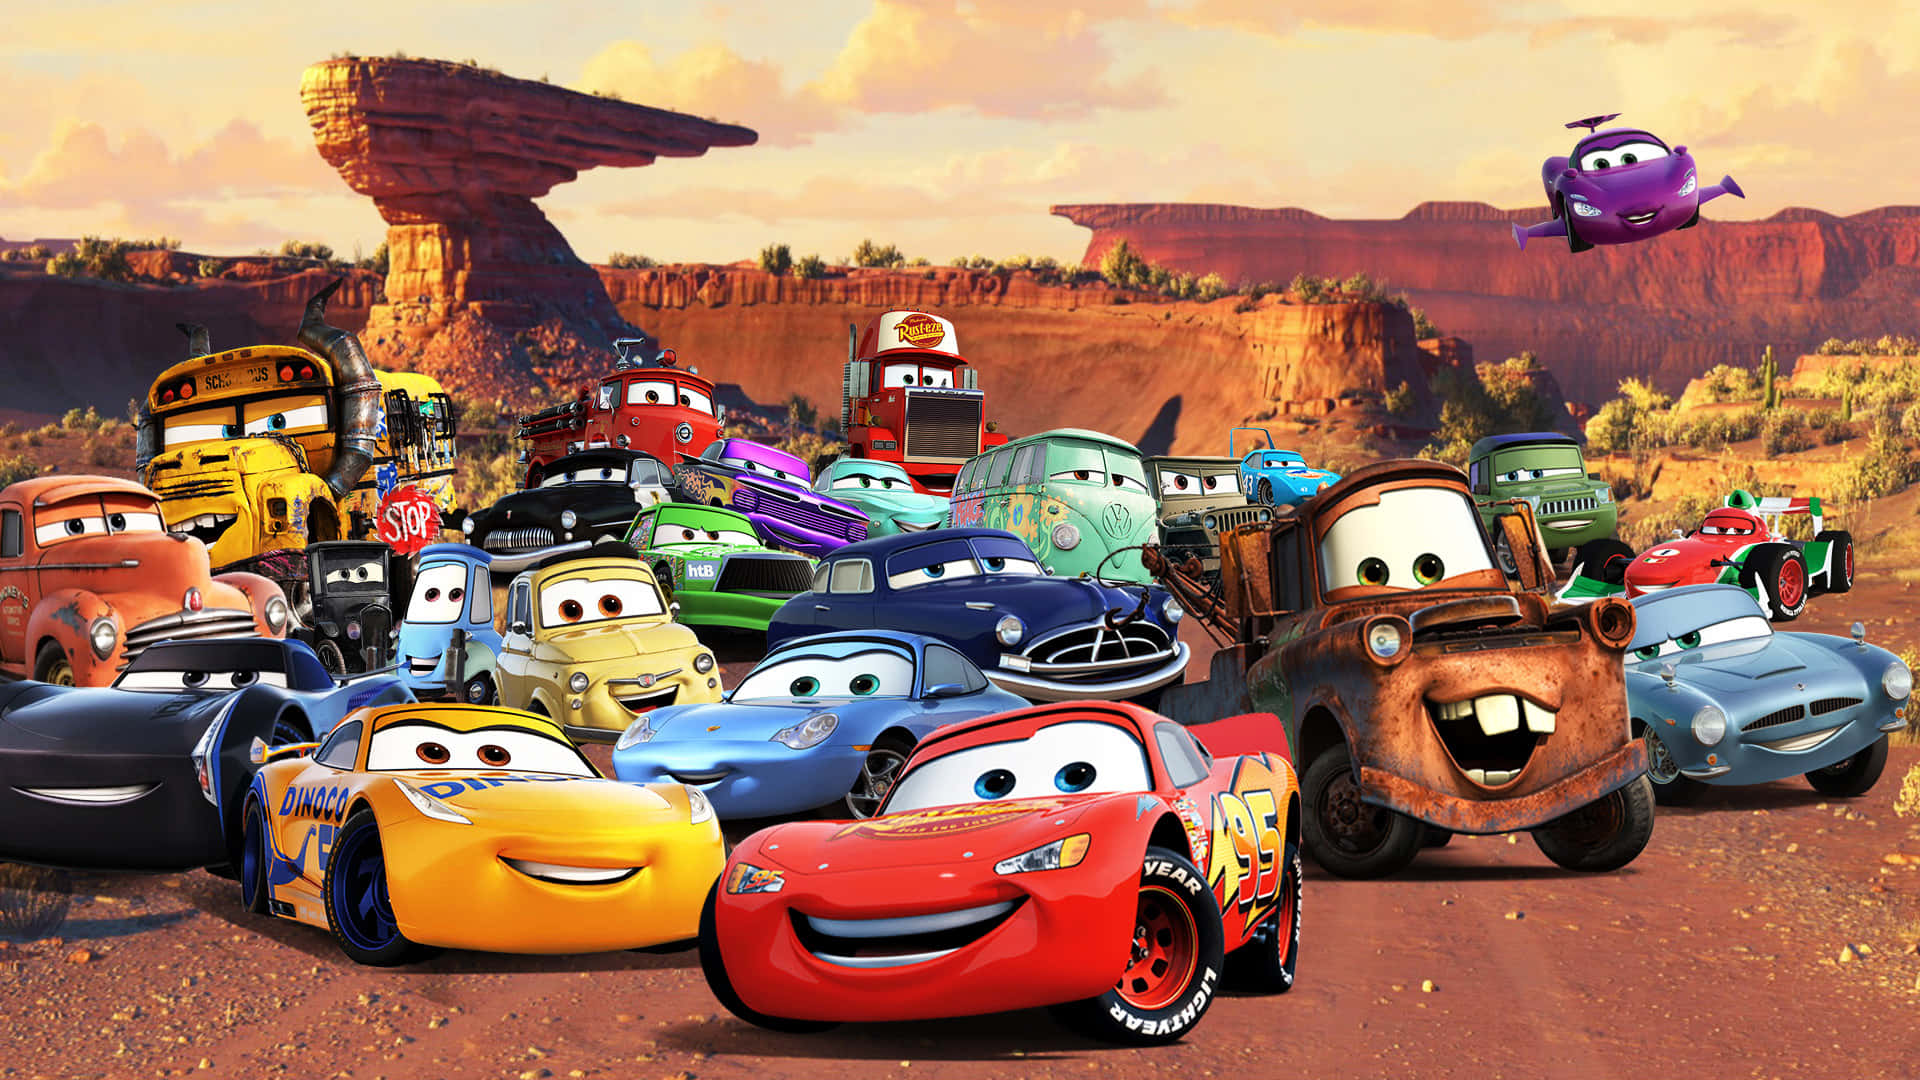 Lightning McQueen and Mater from Disney's Cars ready to race